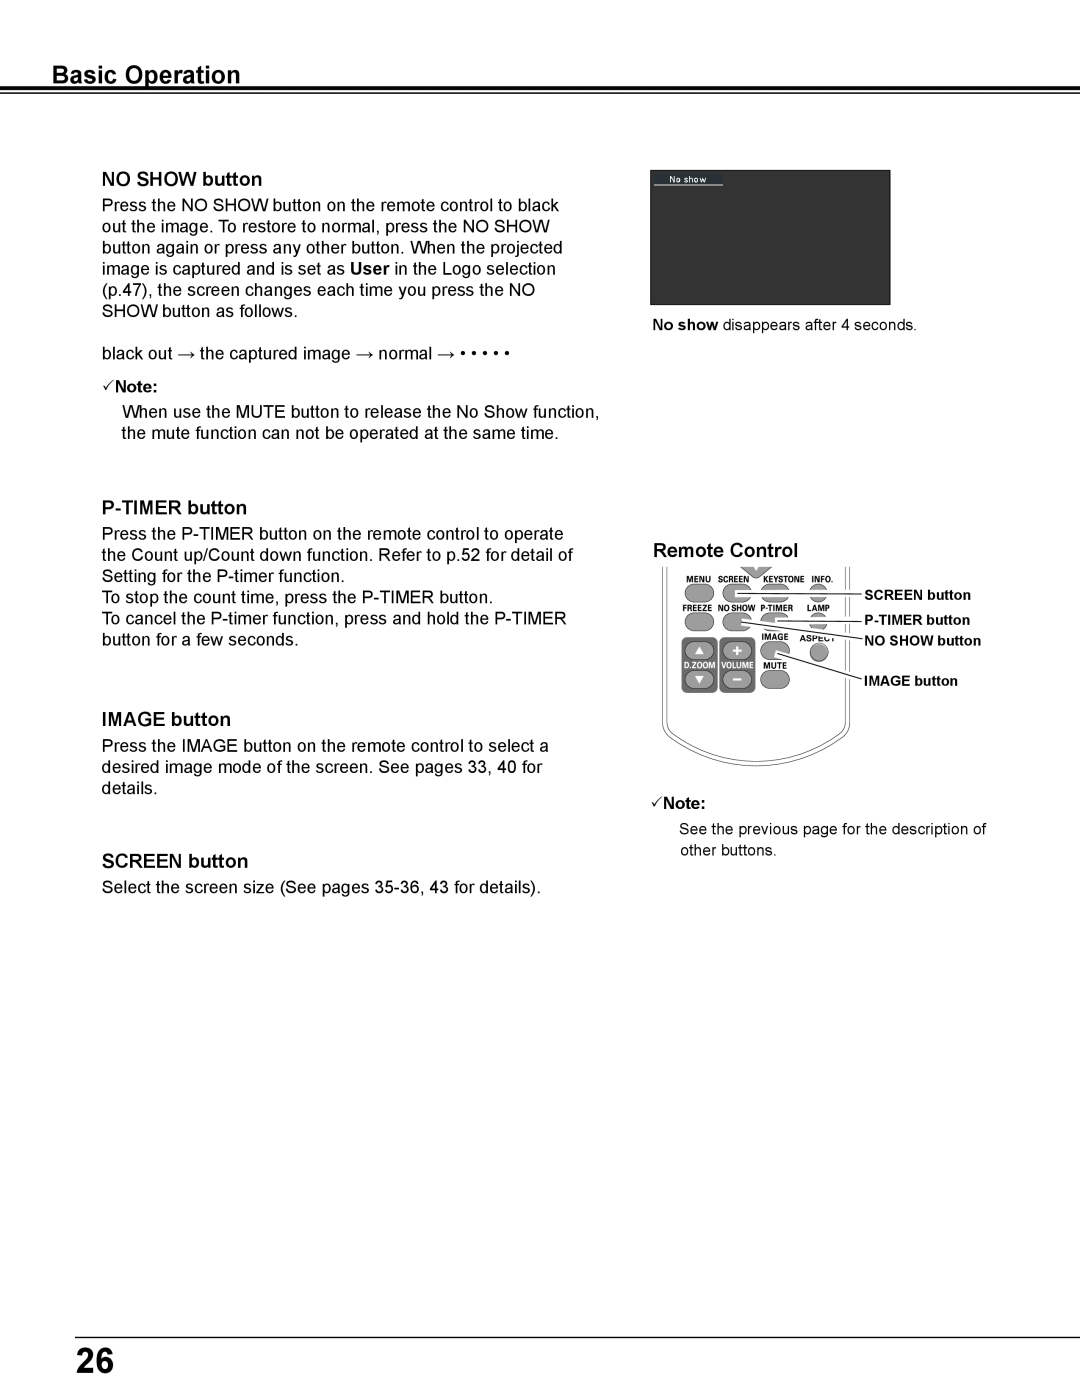 Sanyo PLC-WL2503A owner manual Basic Operation, black out → the captured image → normal →, Note 